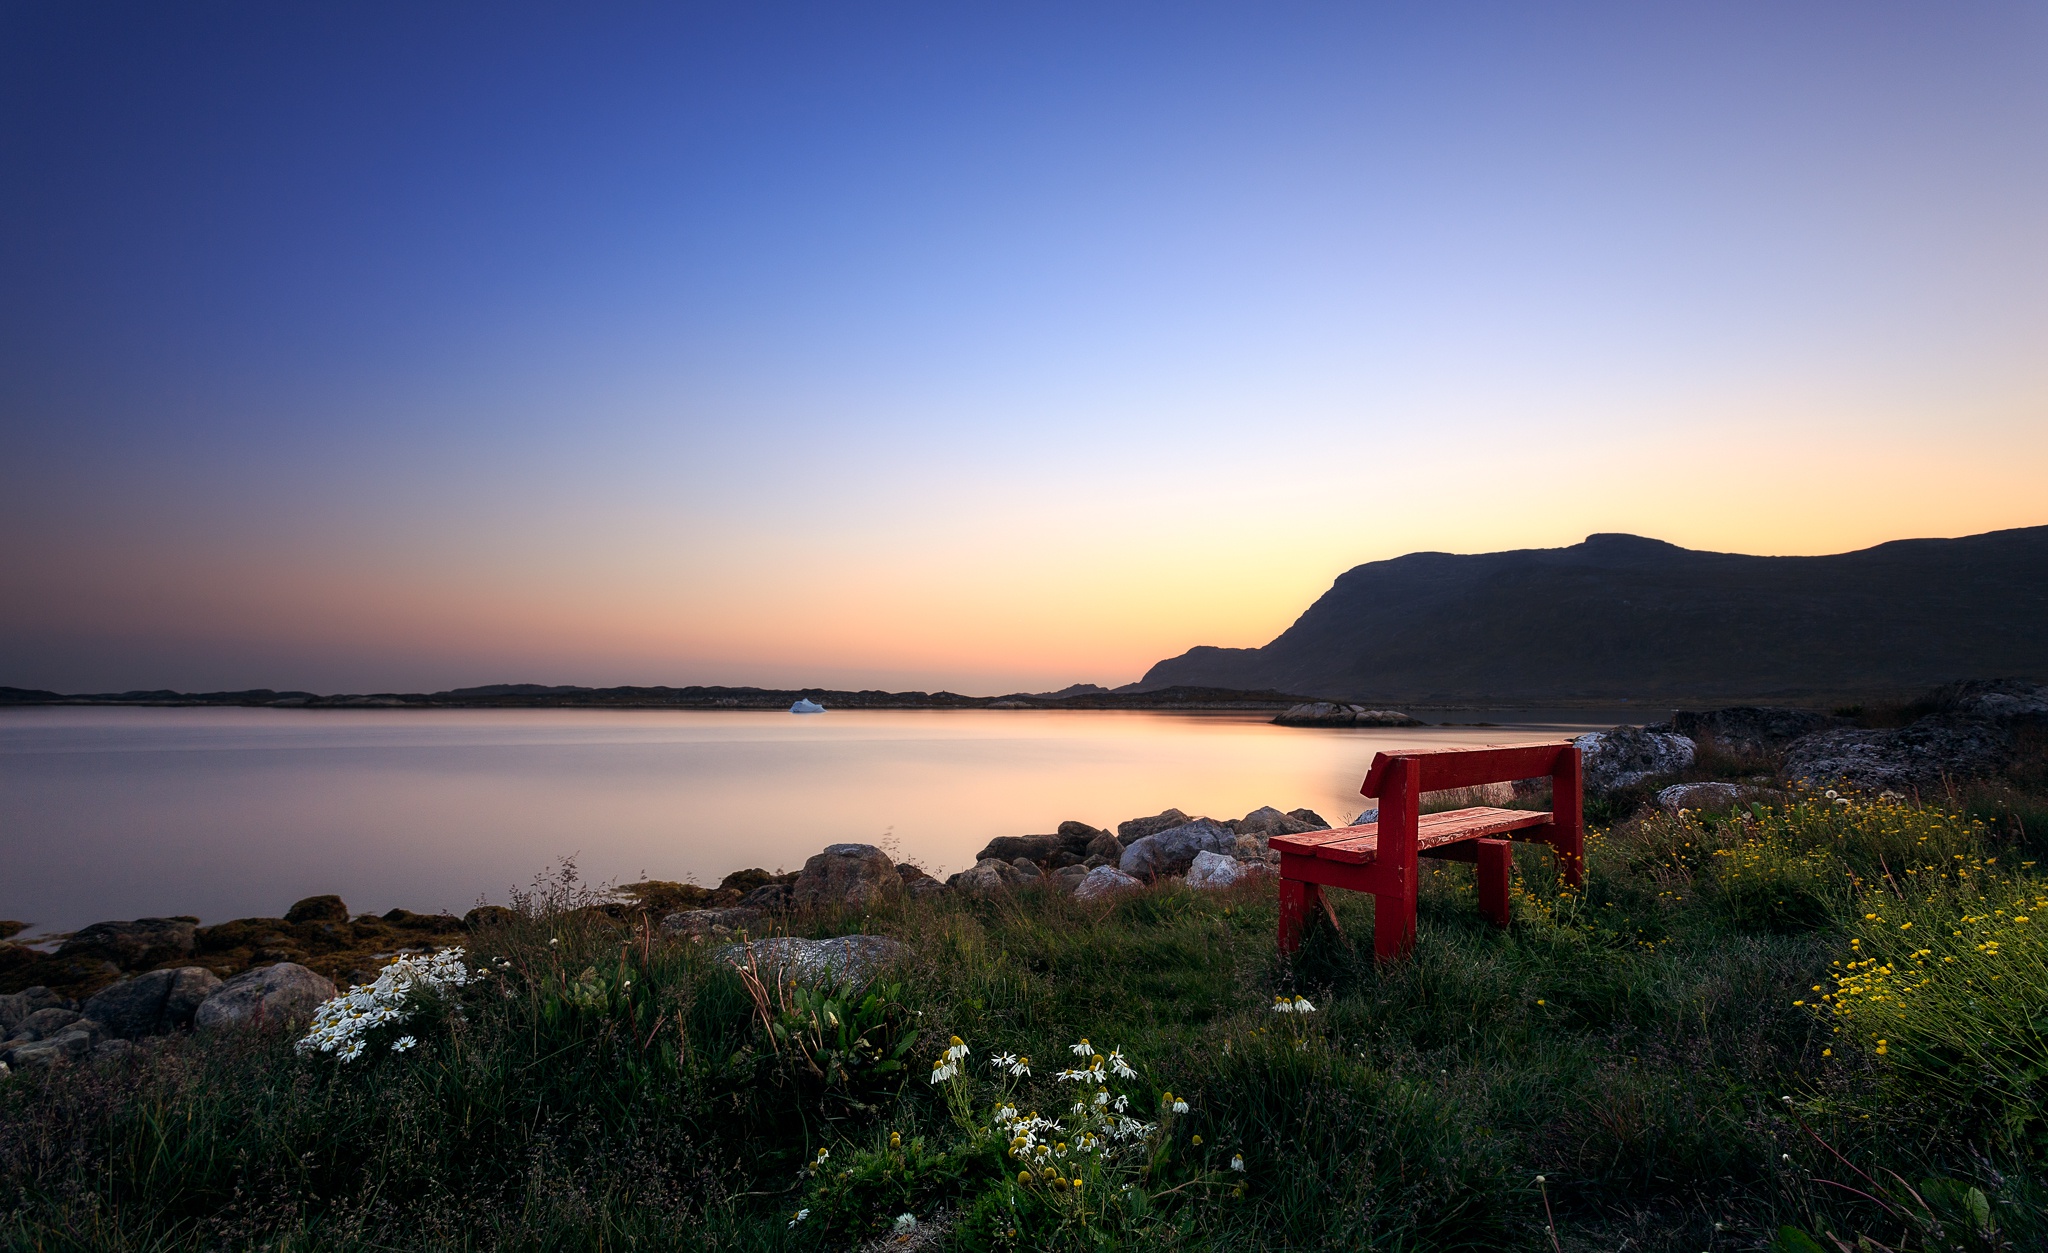 General 2048x1253 Greenland sky outdoors bench